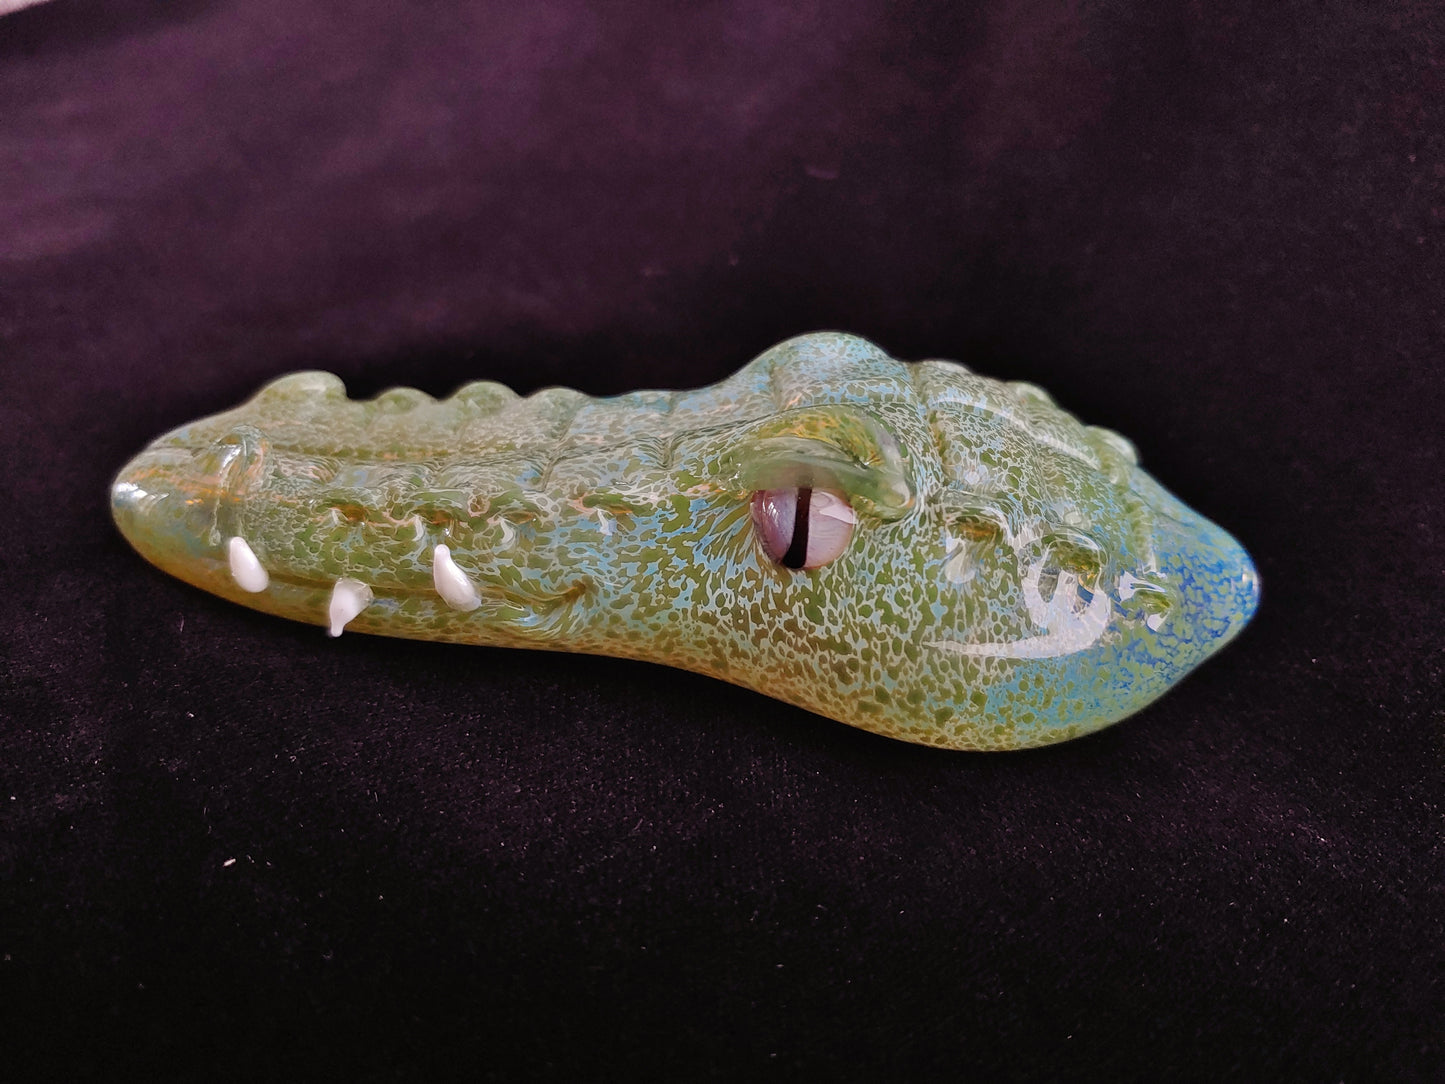 Glass gator pipe. Detailed, sculpted alligator or crocodile.